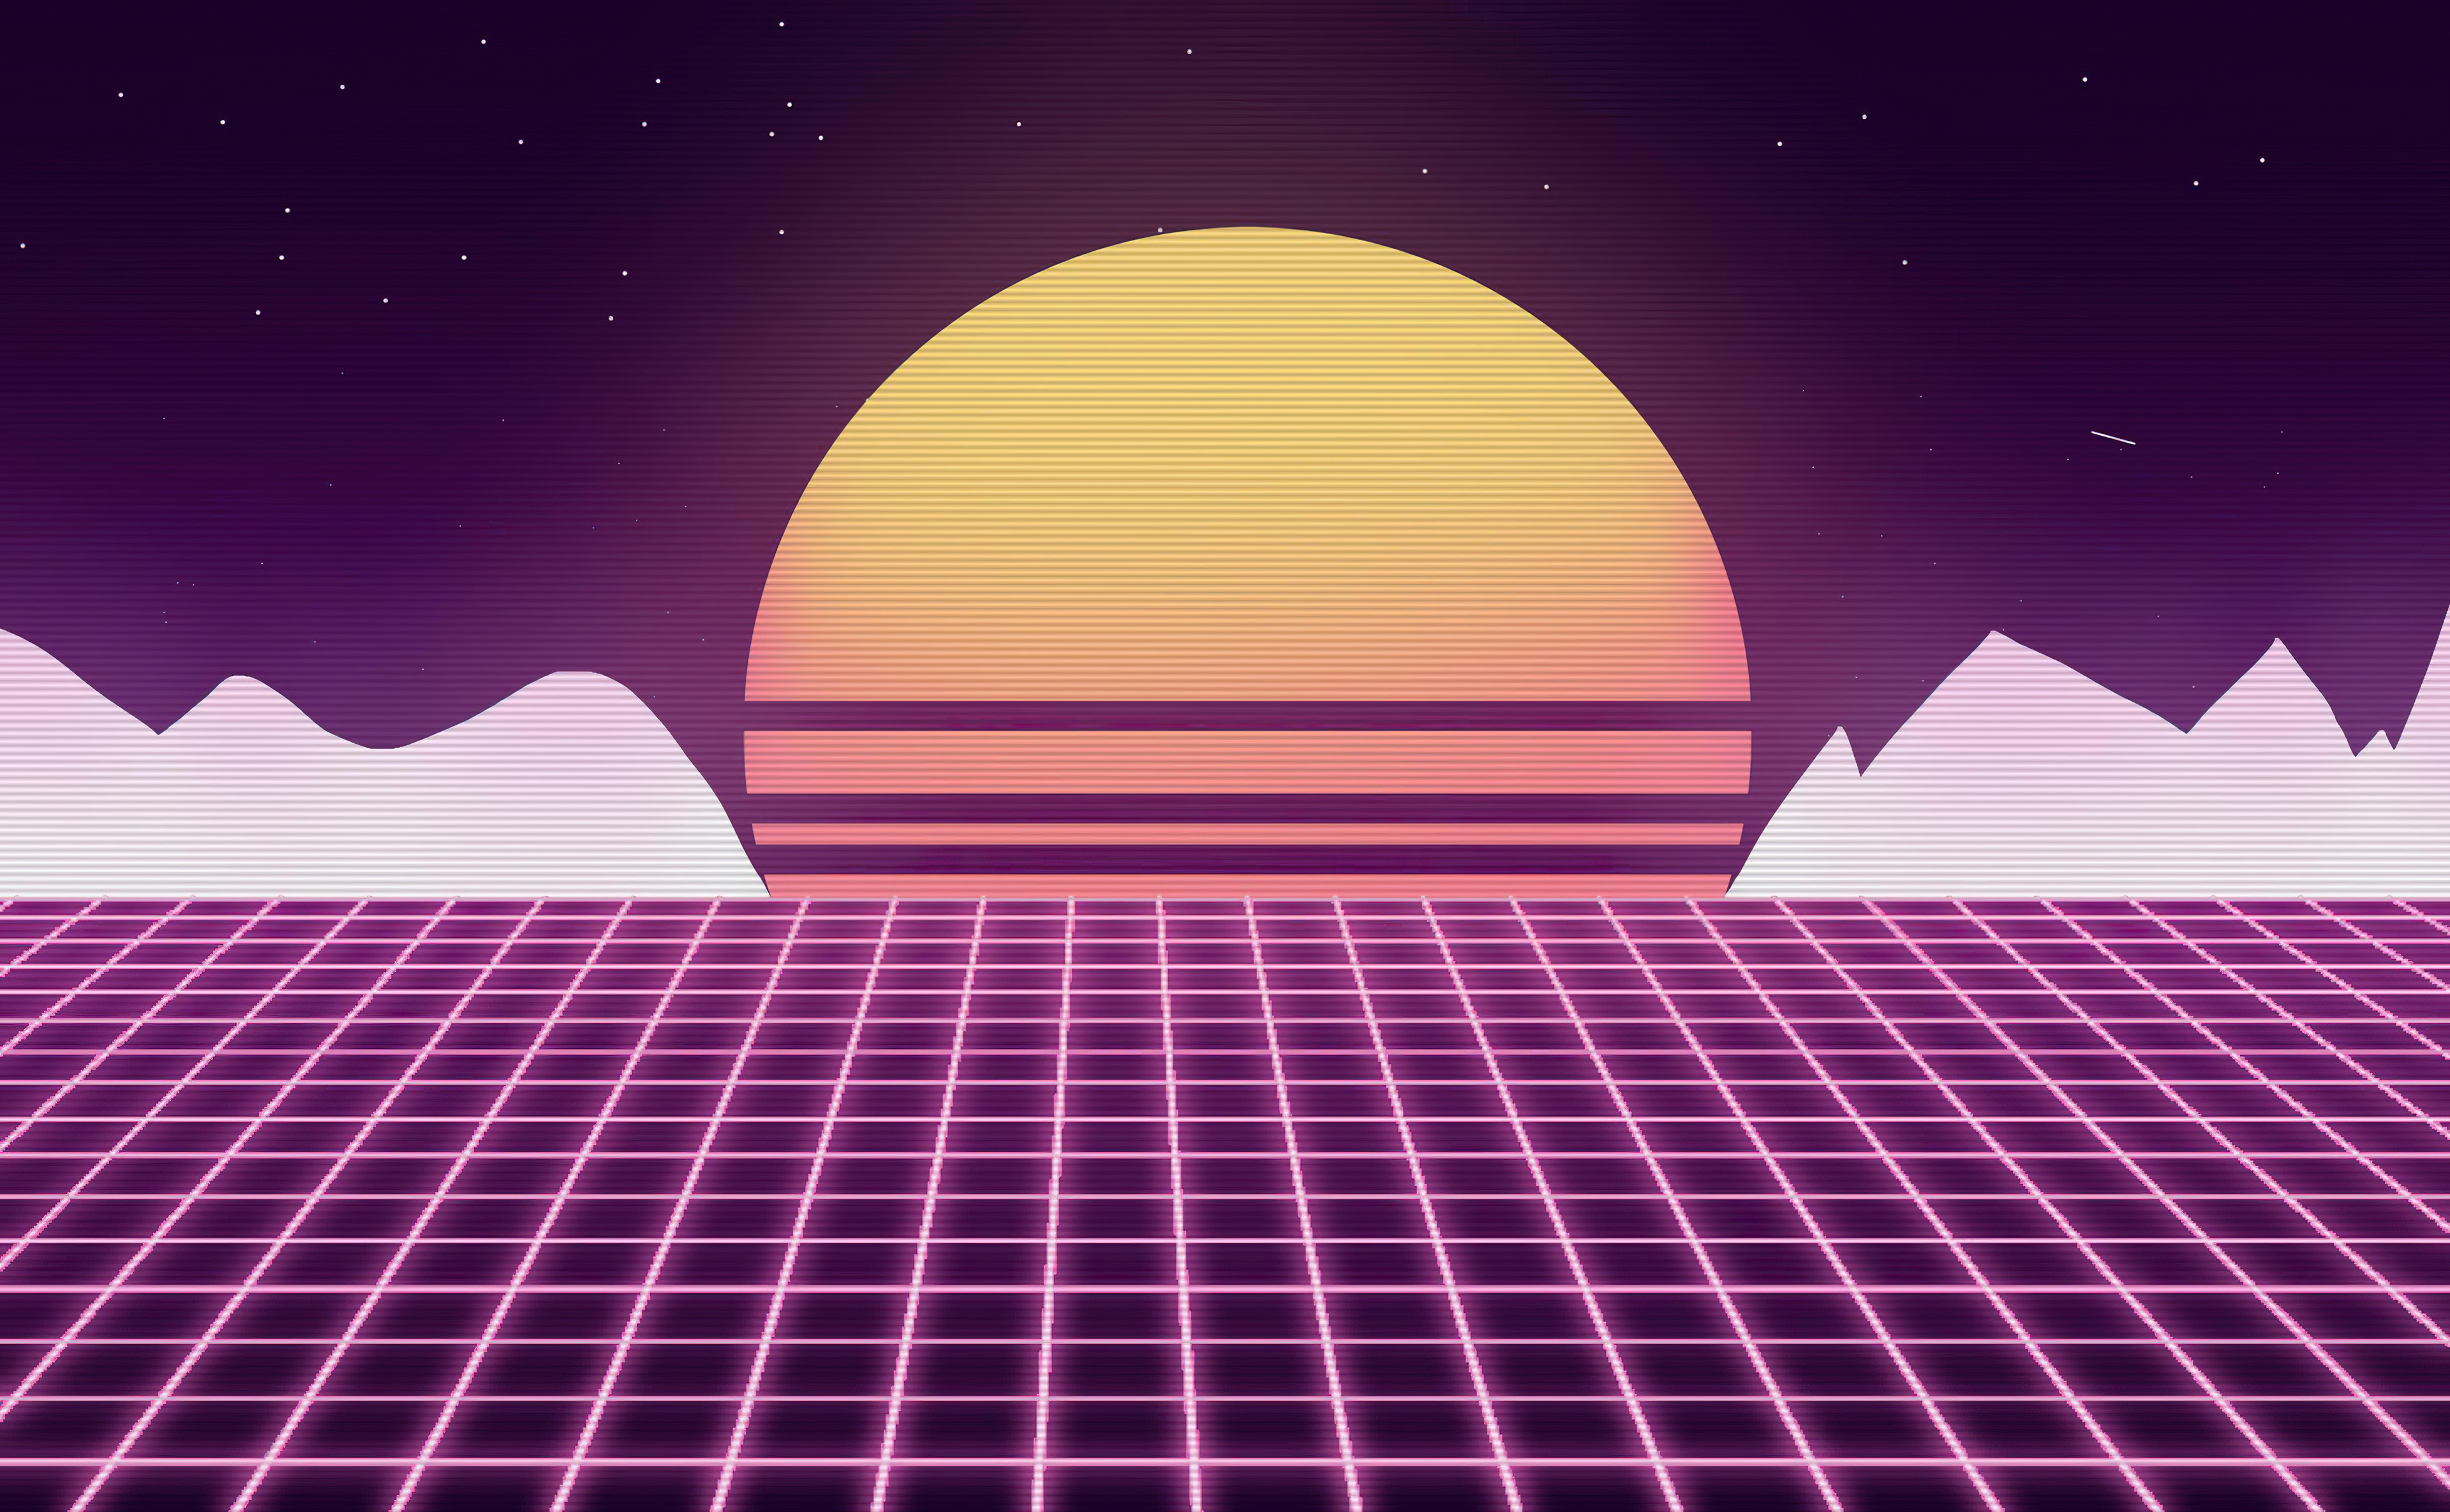 Synthwave 1080P 2K 4K 5K HD wallpapers free download  Wallpaper Flare